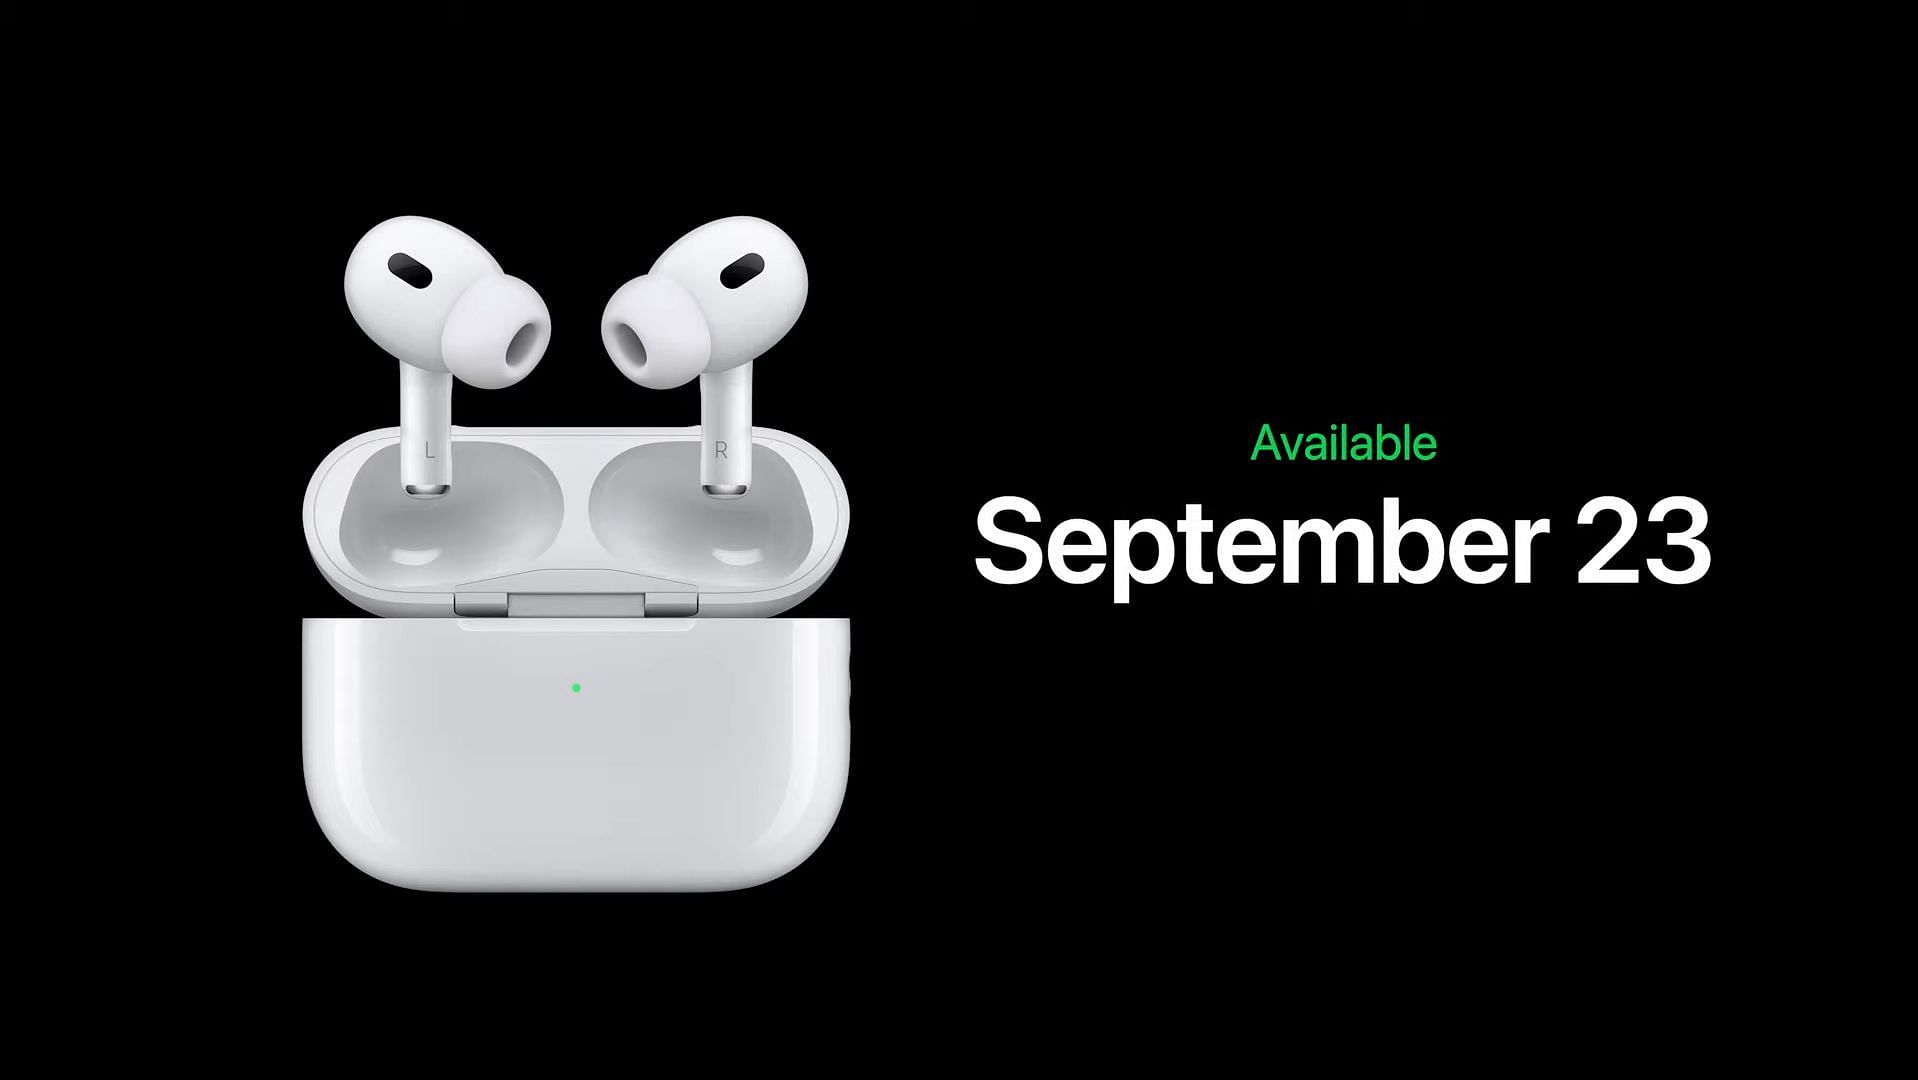 The 2nd gen Airpods Pro is launching on September 23 (Image via Apple)